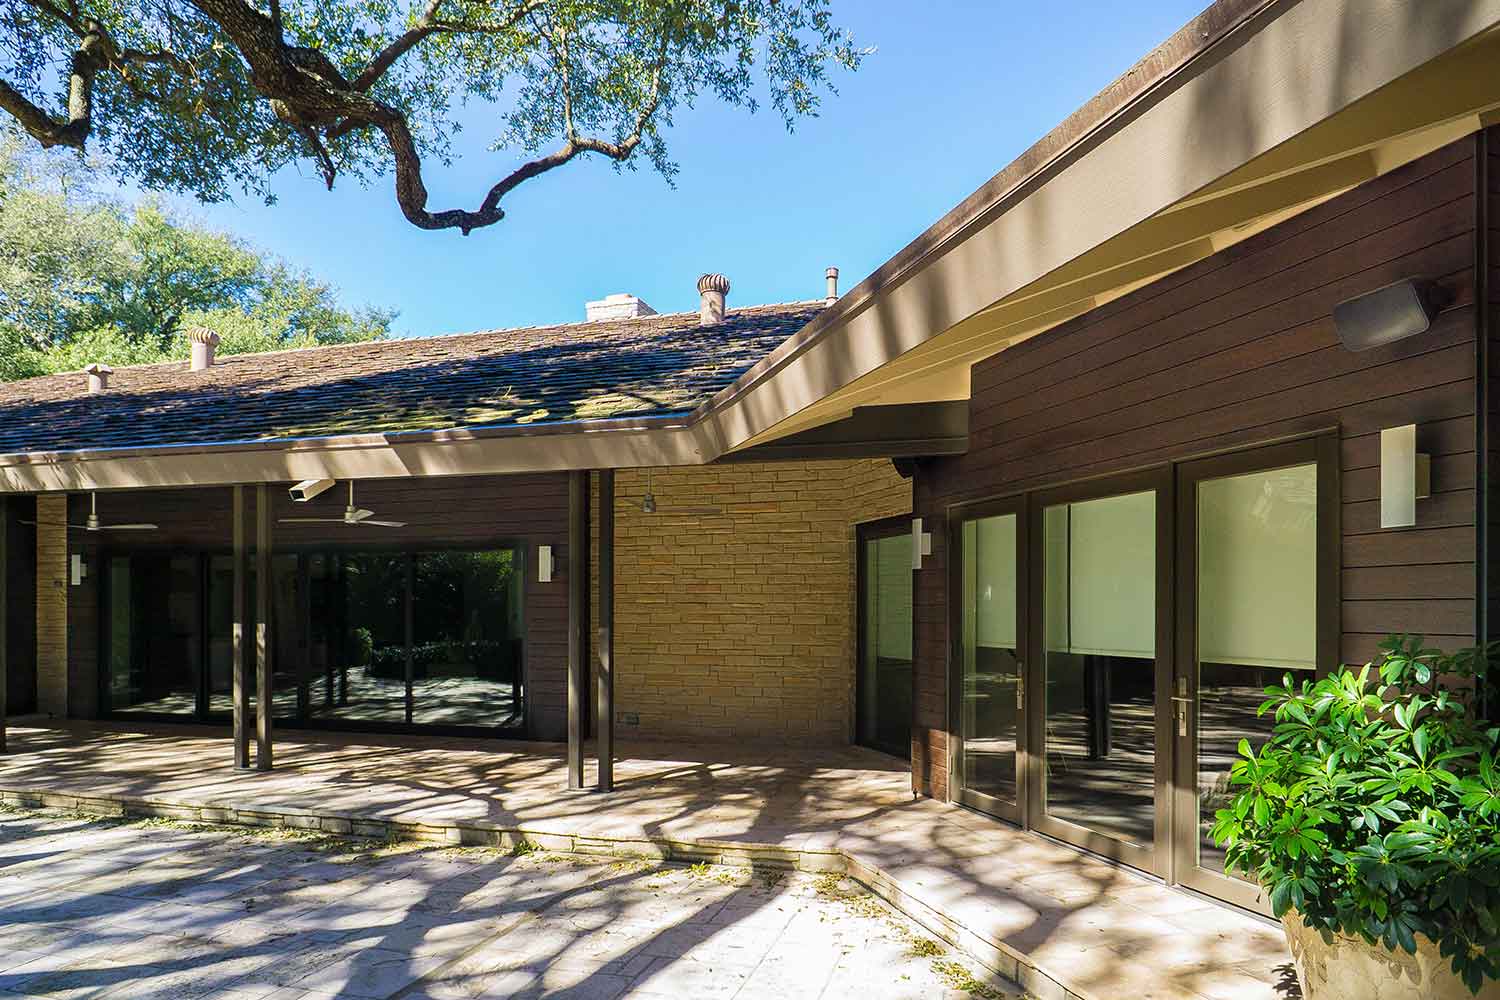 Within the vibrant neighborhood of Olmos Park in San Antonio, Texas, rests this beautiful ranch-style stone home.  When architect Elizabeth D. Haynes was given the task of designing the remodel and new addition to the home, she turned to Voyles Orr Construction to make the dream a reality.  Haynes chose dassoXTR RainClad Siding for the exterior around the home. This product is made from Fused Bamboo® that uses a clip system to produce a seamless rainscreen siding.  The equally stunning and strong Ipe-like appearance gives a wonderful contrast to the stone exterior.